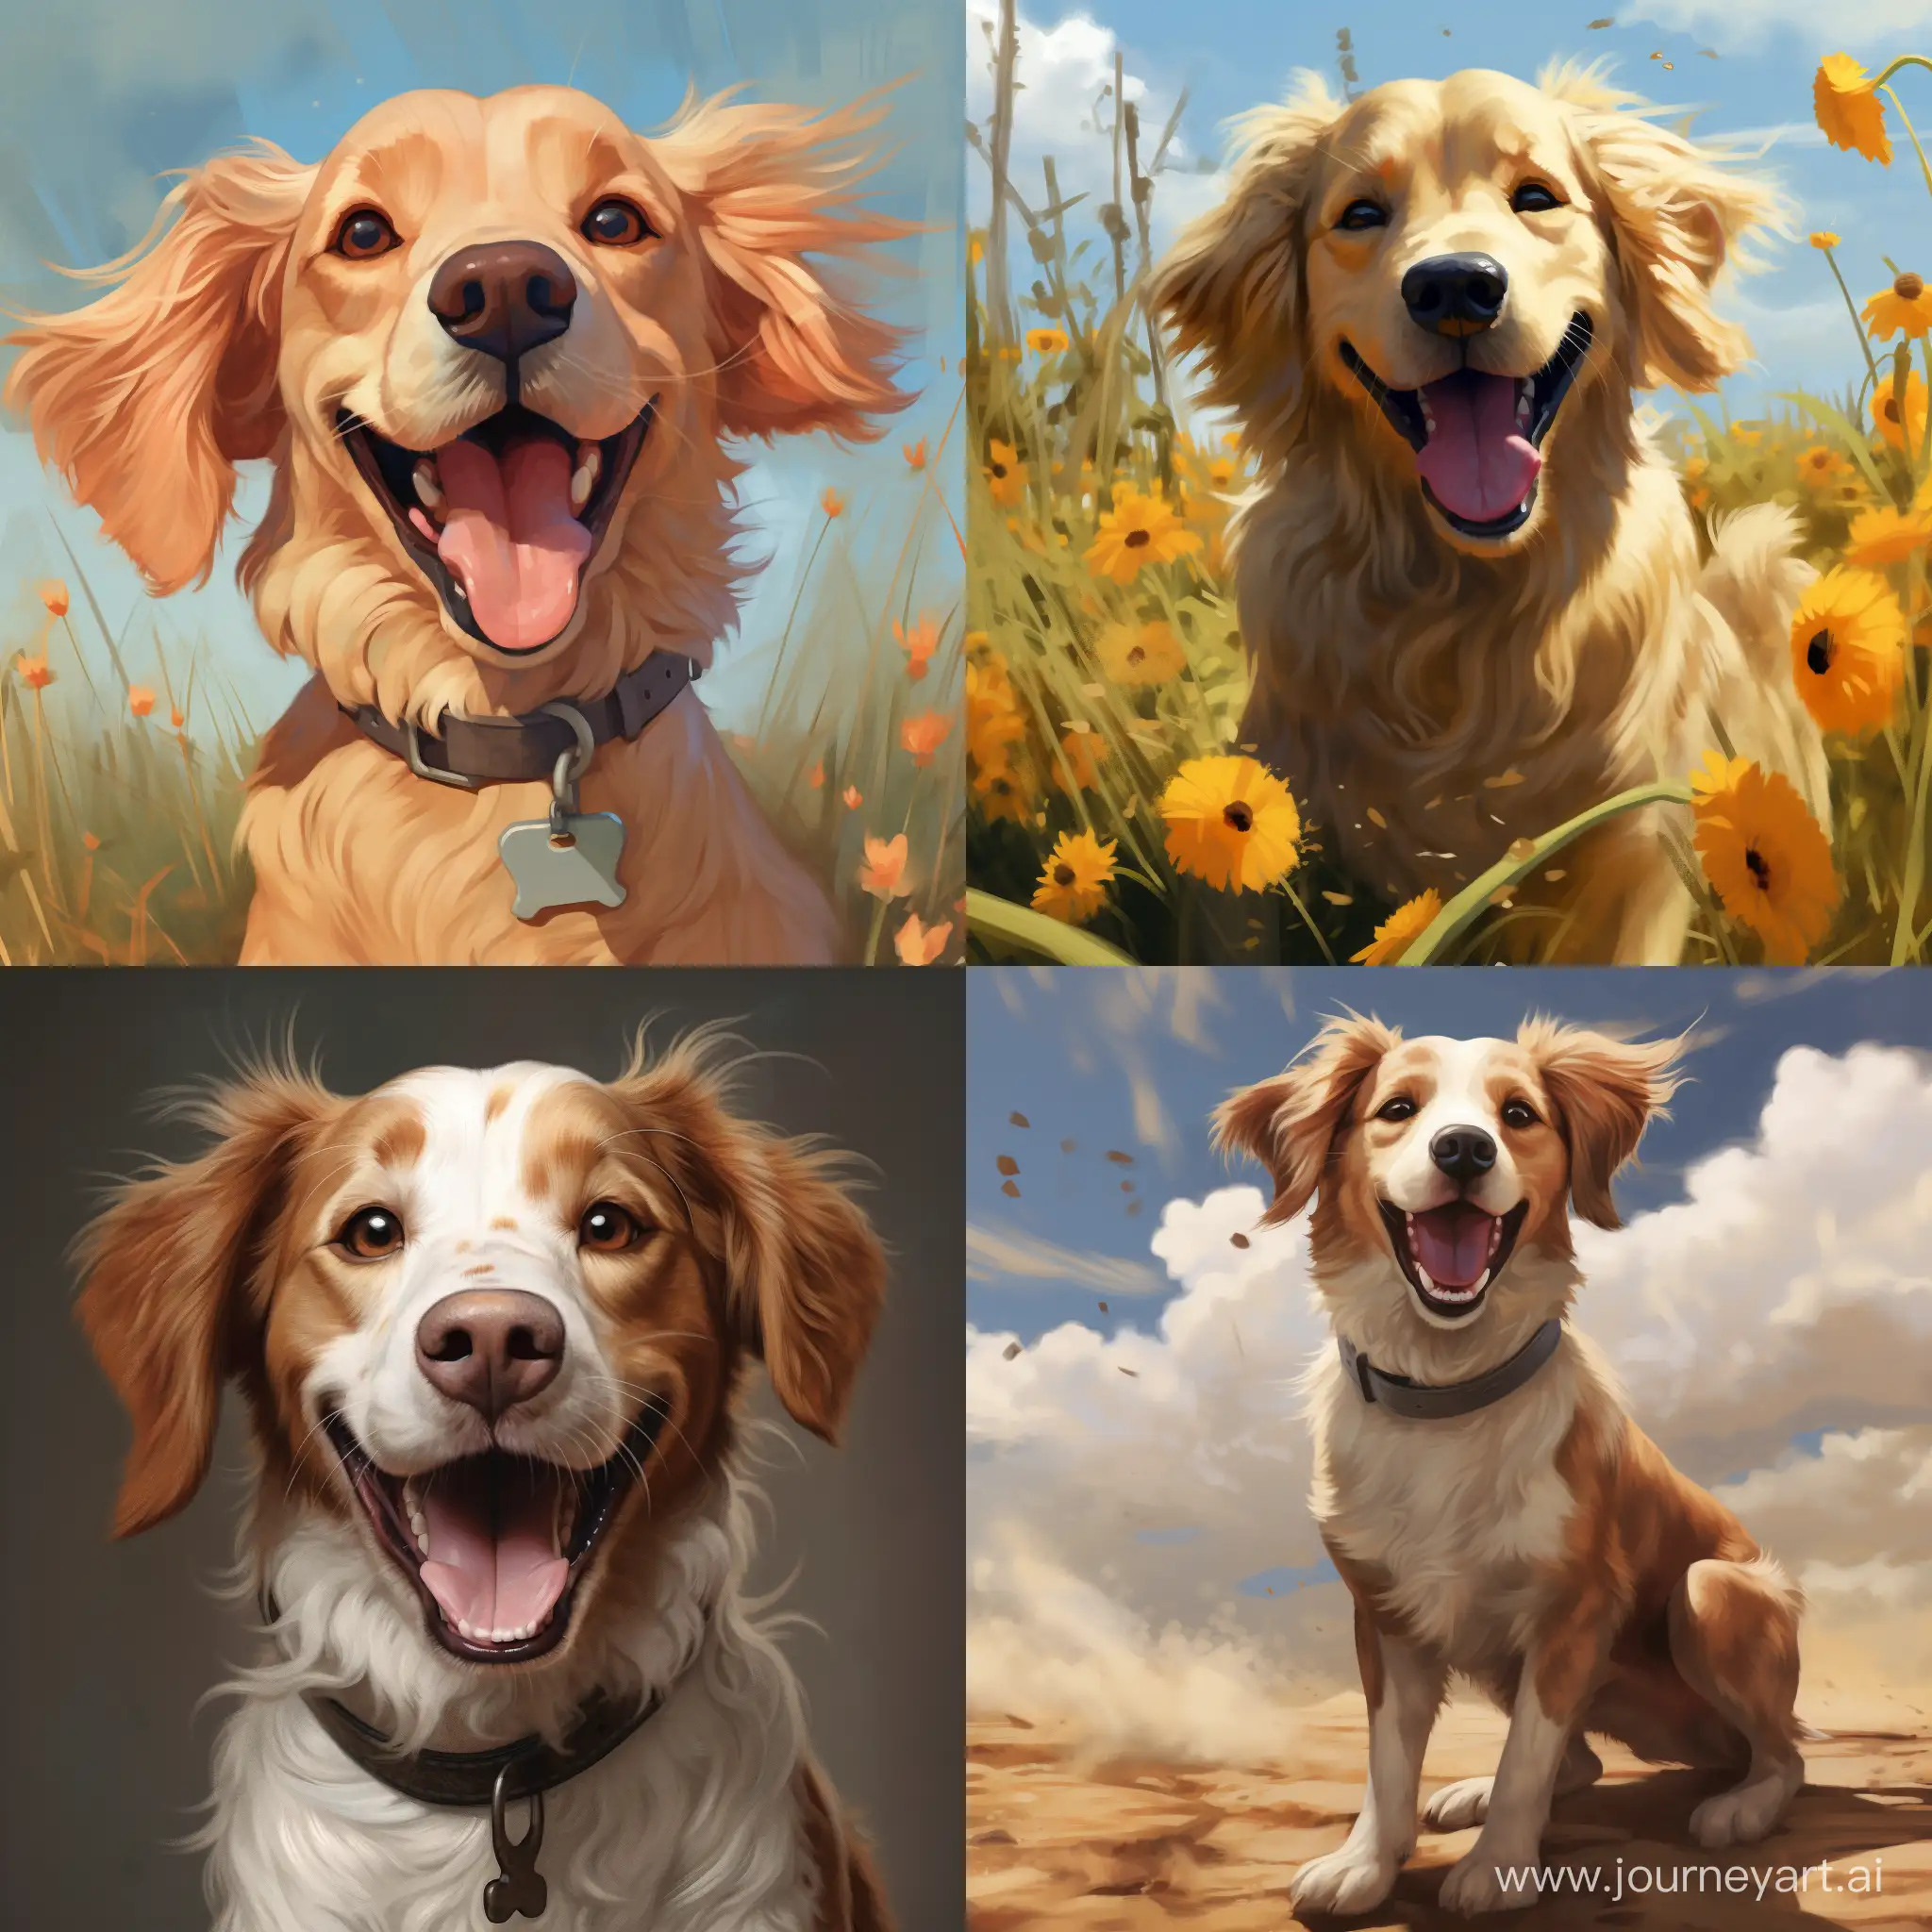 Joyful-Canine-Delight-Cheerful-Dog-in-a-Square-Frame